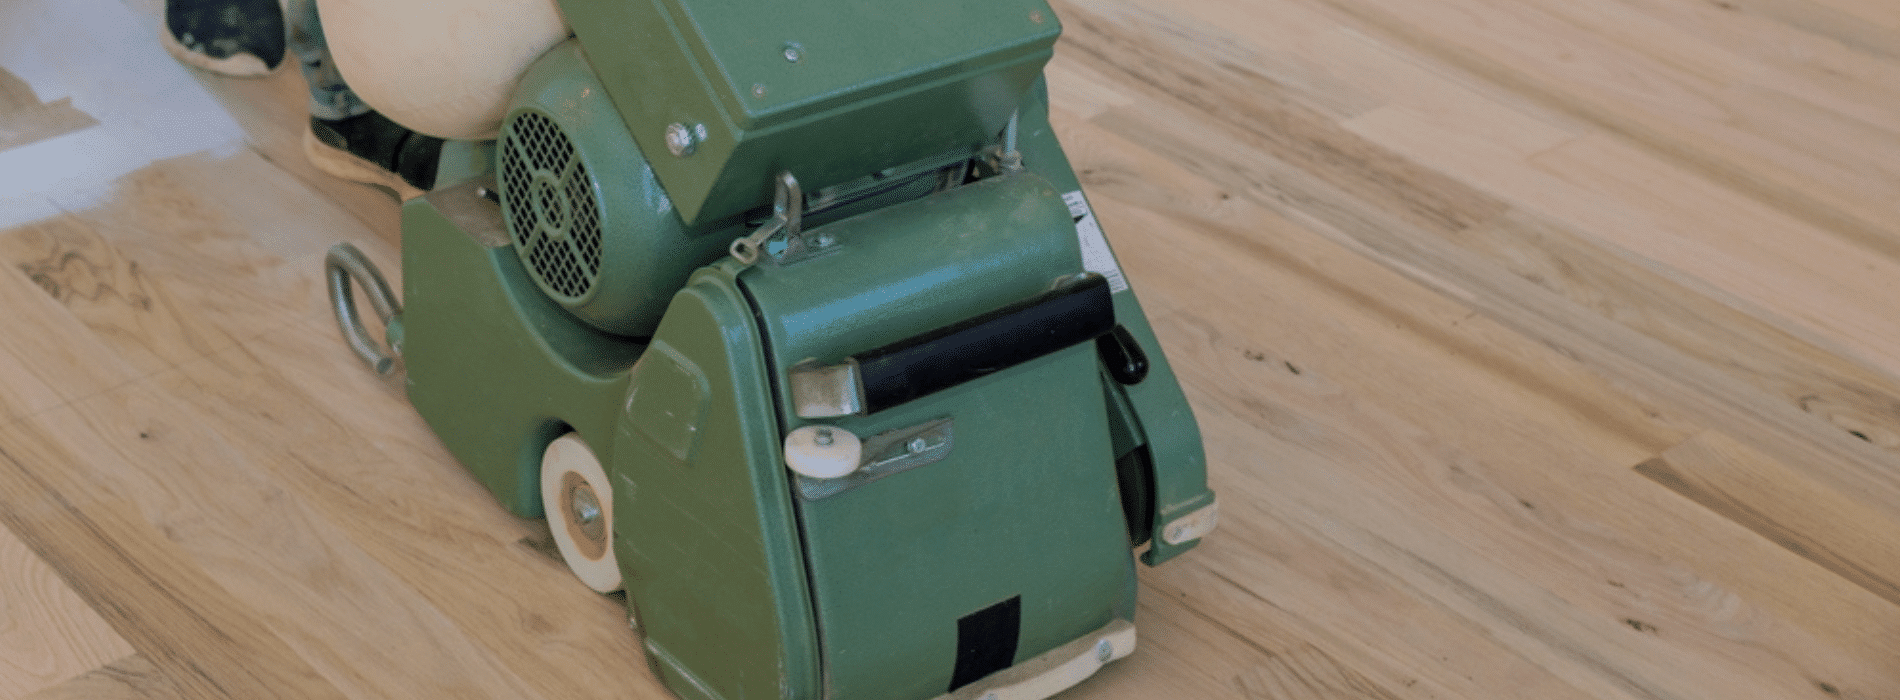 Mr Sander® are using a Bona Scorpion, a powerful 200 mm drum sander, to sand a parquet floor in World's End, SW10. With a 1.5 kW effect, it operates at 240 V and 50 Hz. The sander is connected to a dust extraction system with a HEPA filter, ensuring a clean and efficient outcome.